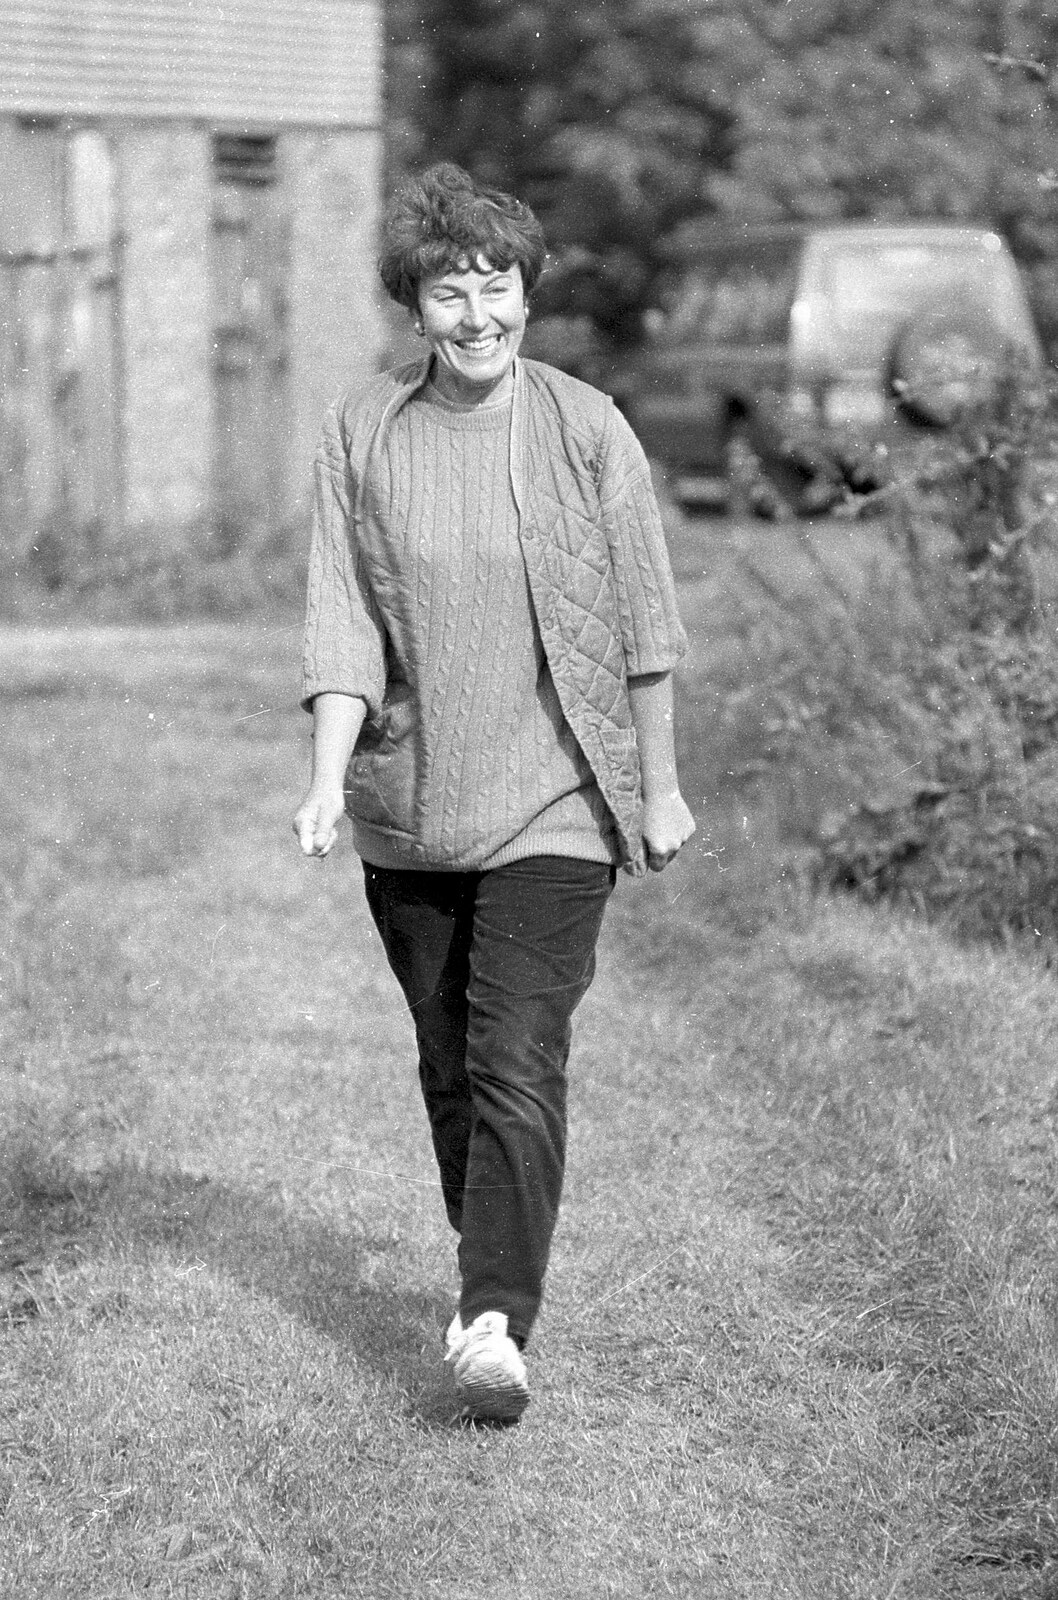 Sue 'Badger' walks back from the bog from Cider Making in Black and White, Stuston, Suffolk - 11th October 1992